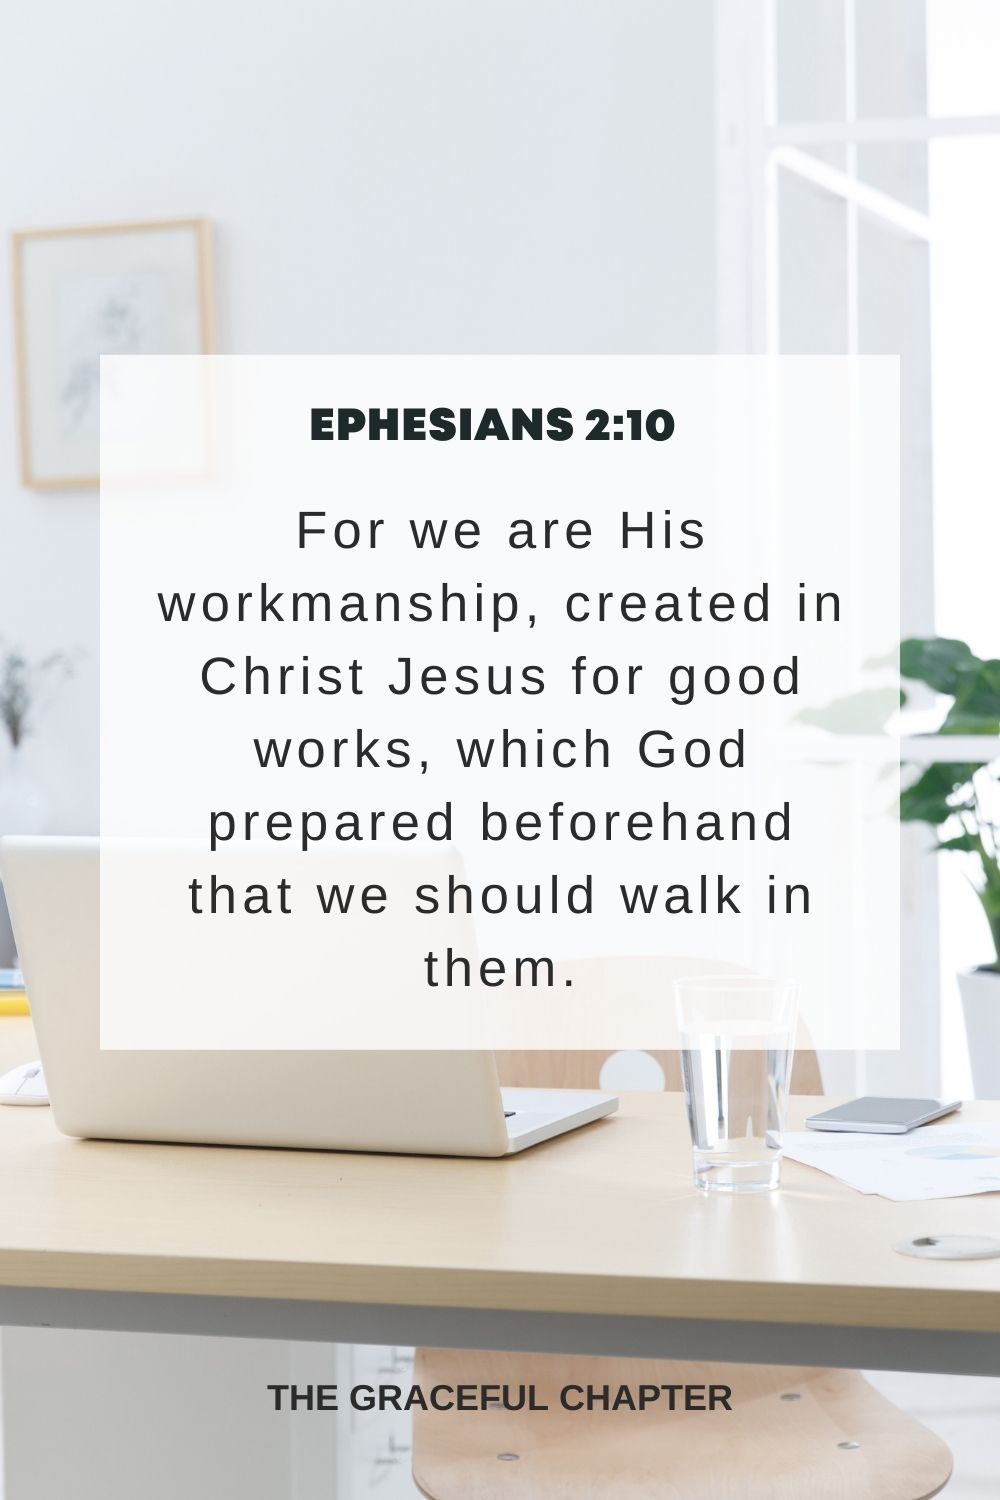 For we are His workmanship, created in Christ Jesus for good works, which God prepared beforehand that we should walk in them. Ephesians 2:10